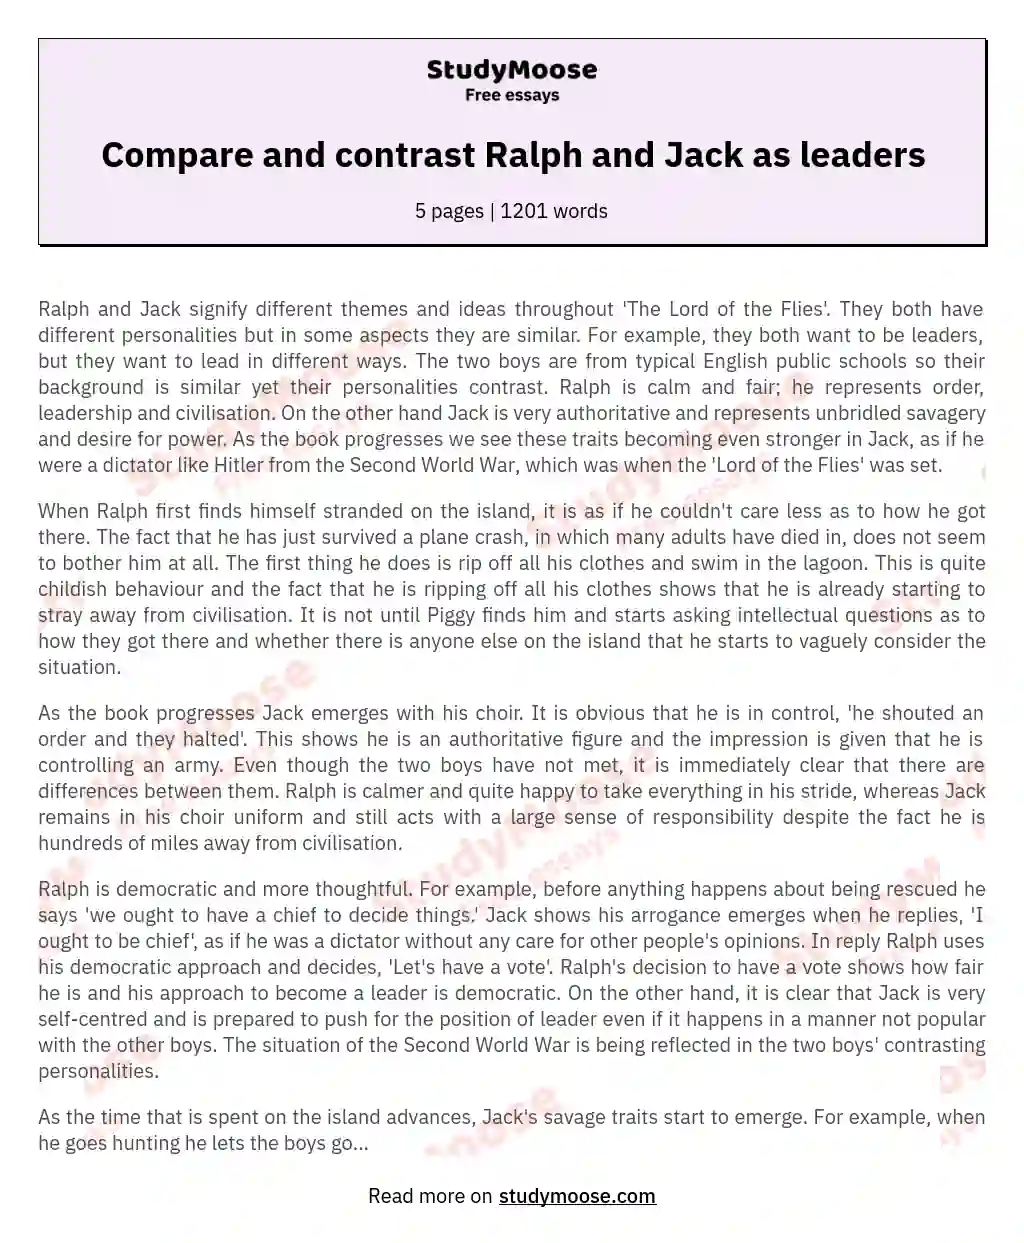 Compare and contrast Ralph and Jack as leaders essay